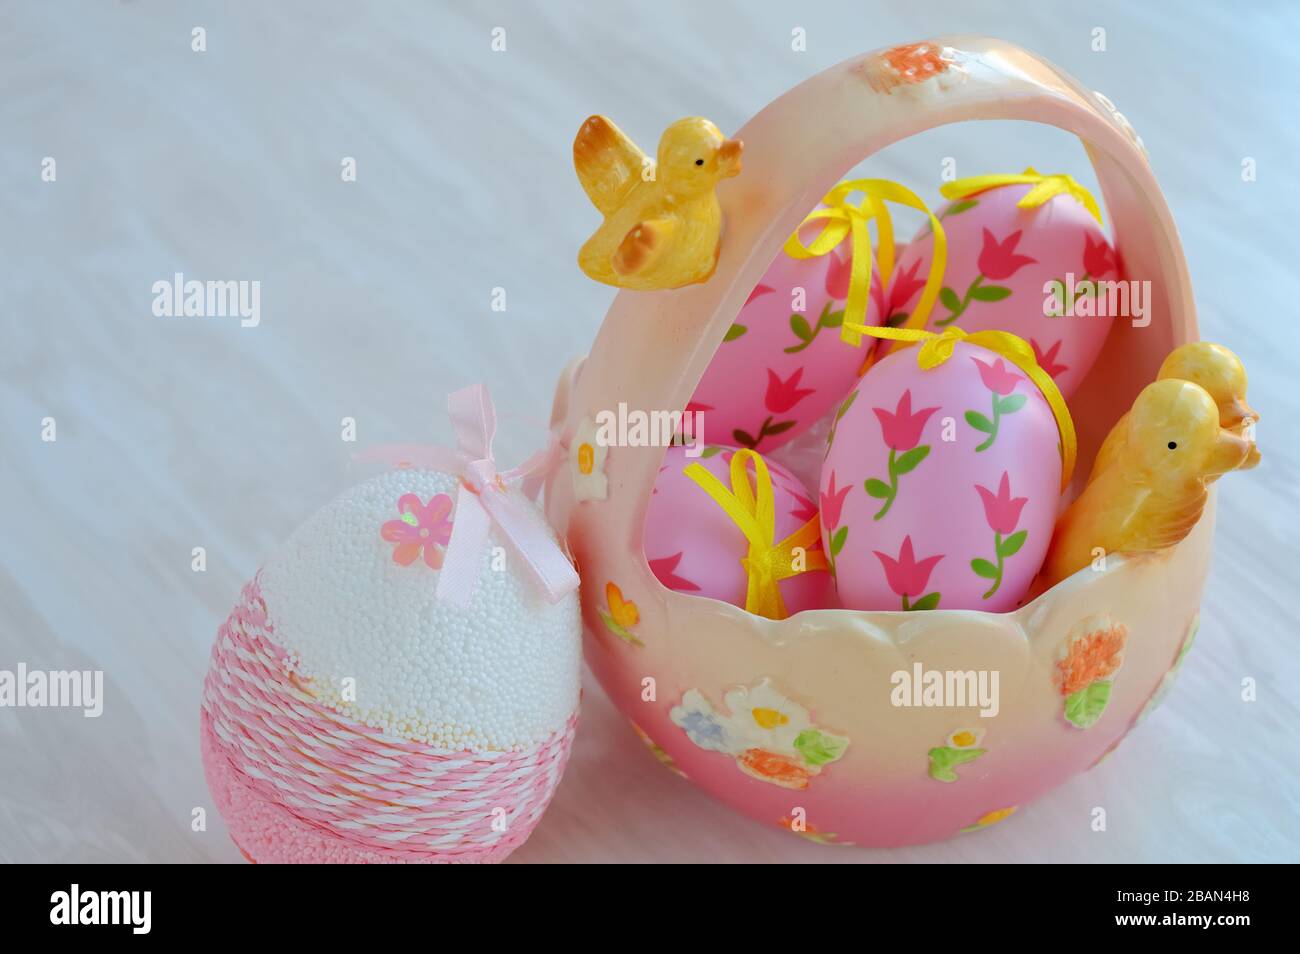 Easter ceramic basket with decorative pink eggs and chick figurines, festive home decor Stock Photo